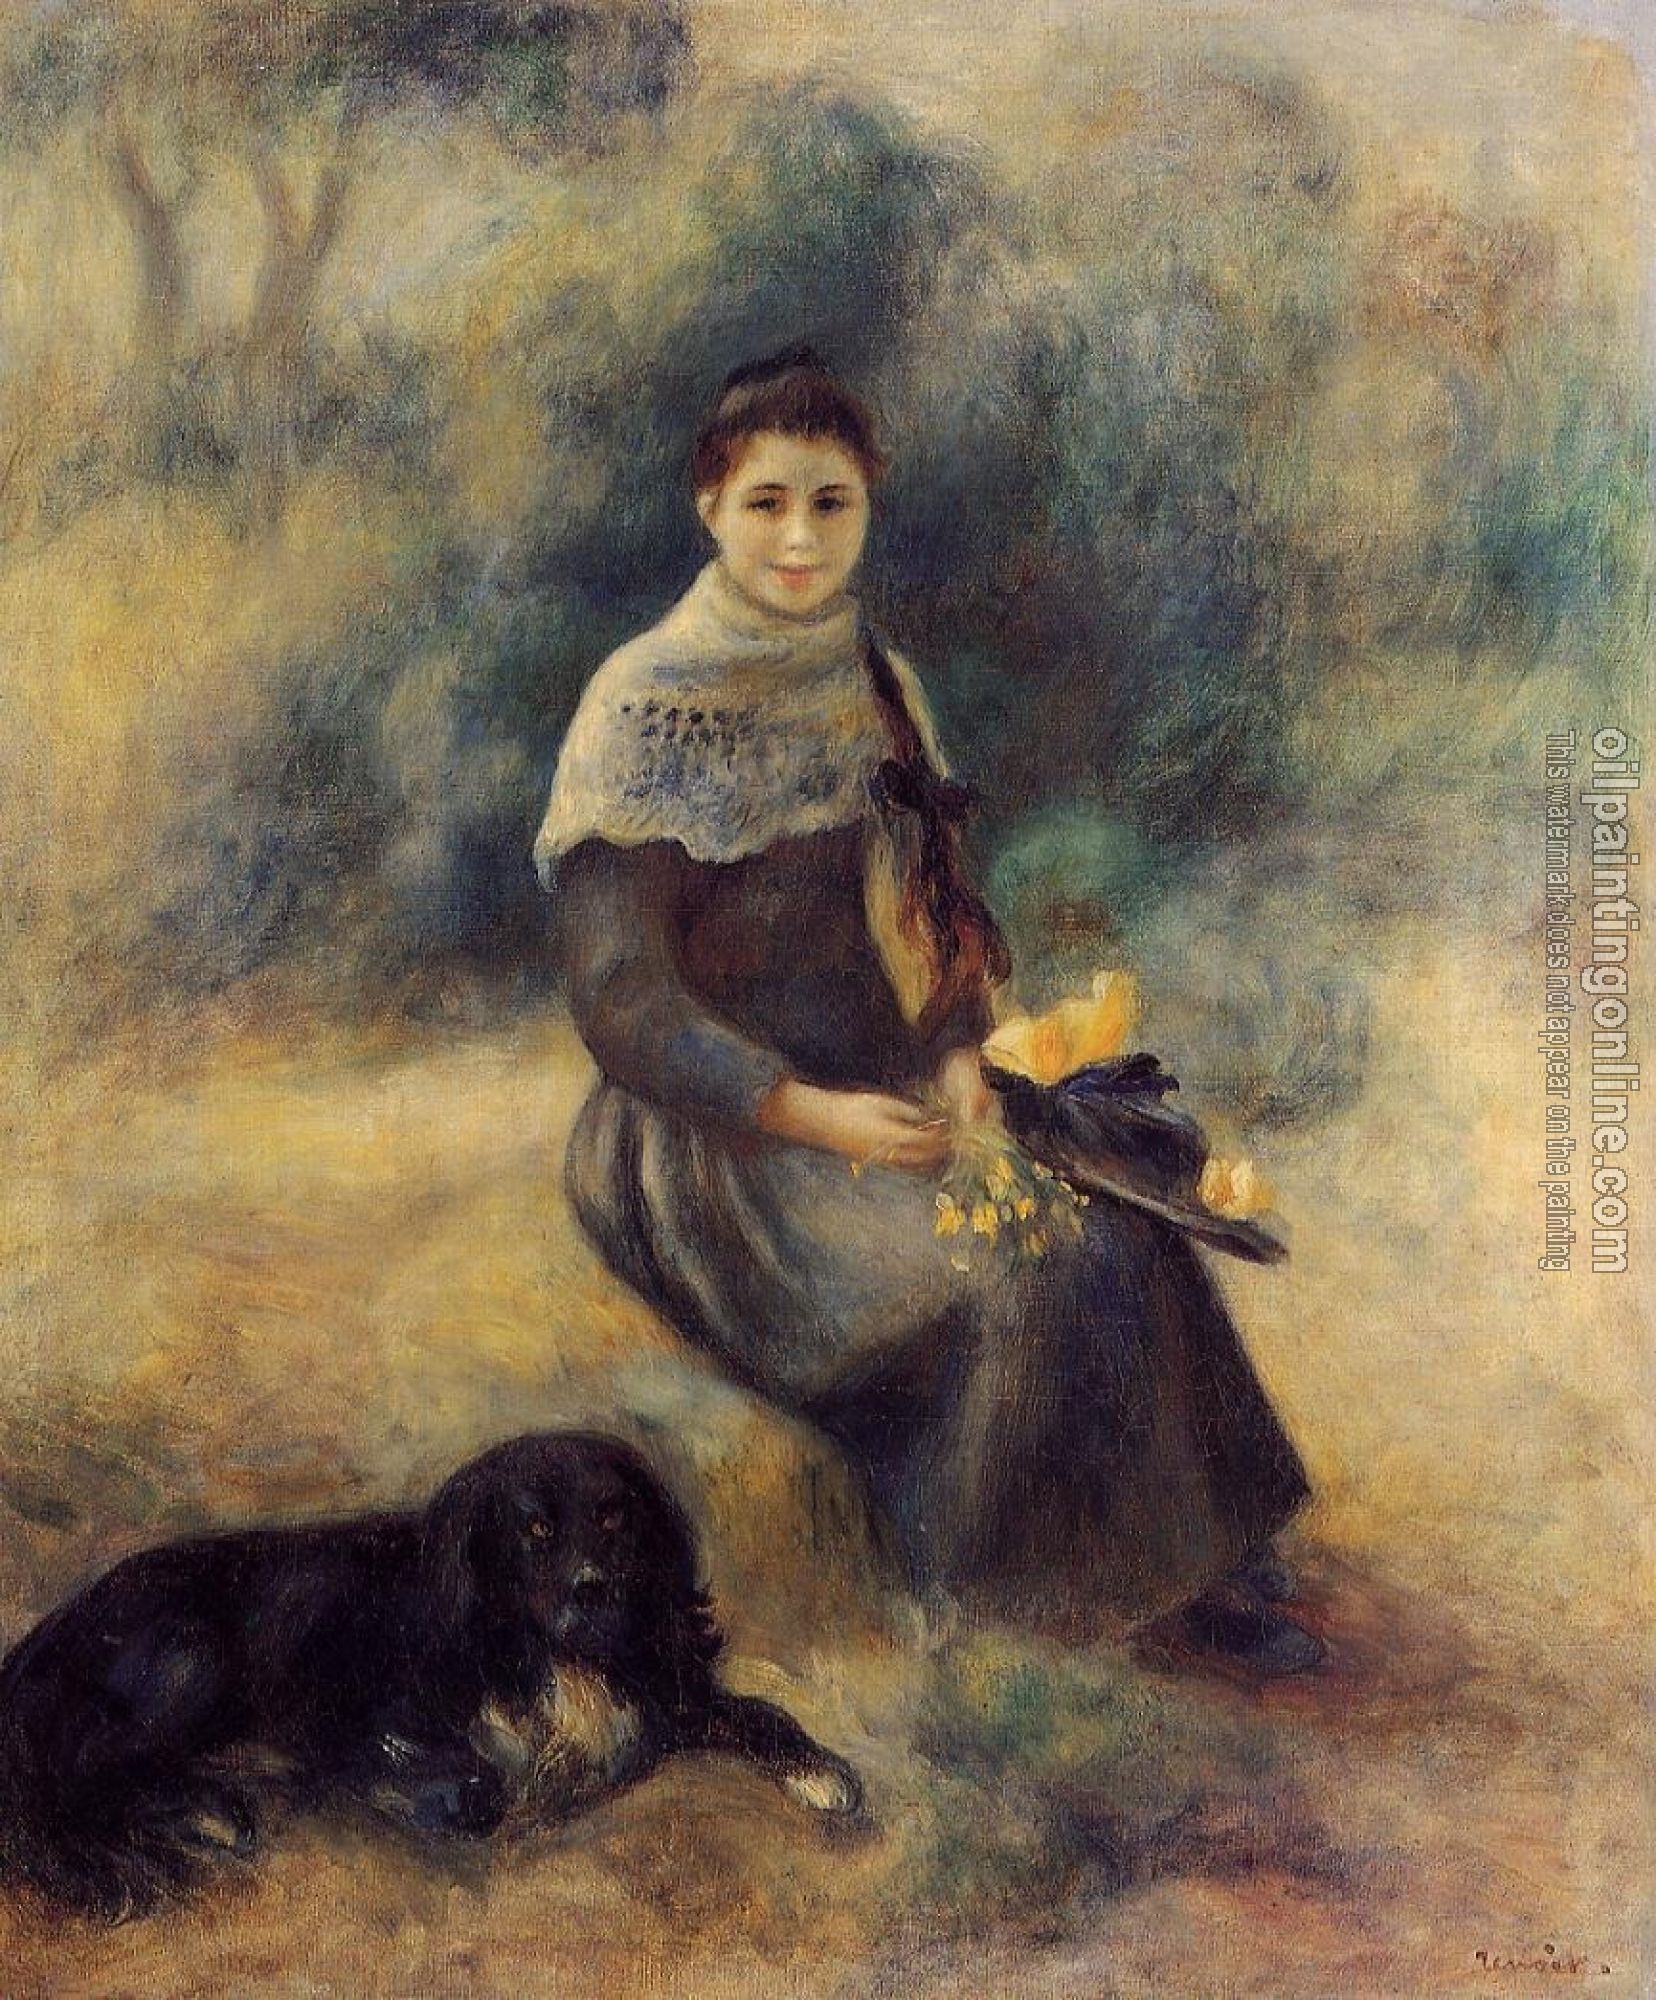 Renoir, Pierre Auguste - Young Girl with a Dog